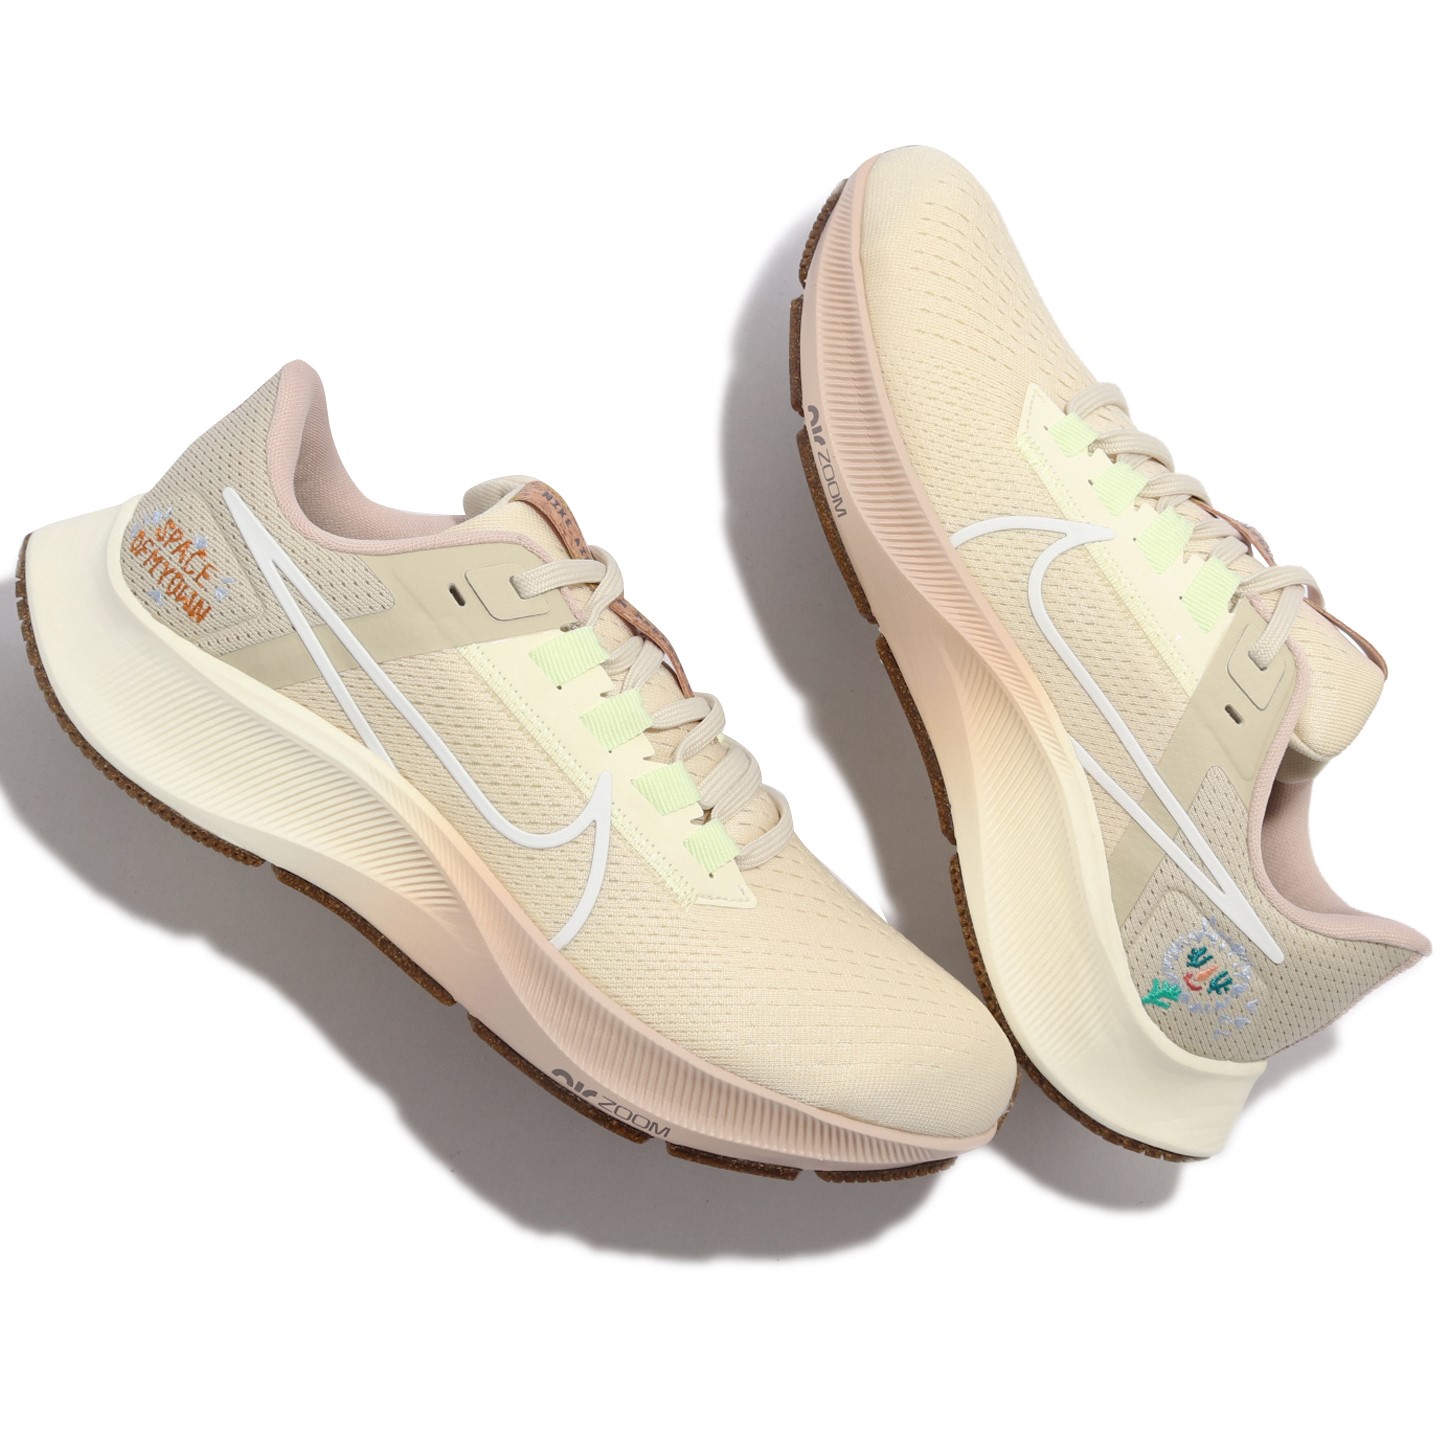 GIÀY THỂ THAO NIKE WMNS AIR ZOOM PEGASUS 38 WOMEN RUNNING SHOES BEIGE 12